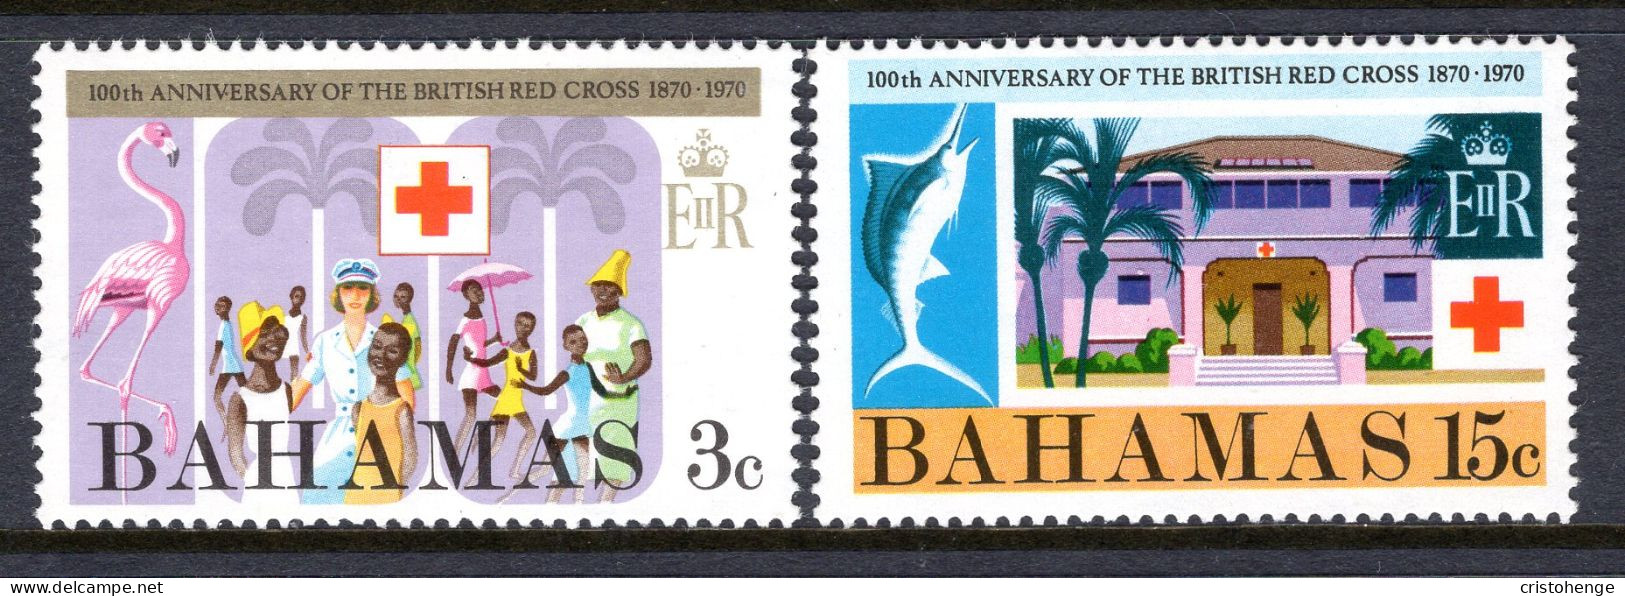 Bahamas 1970 Centenary Of British Red Cross Set LHM (SG 352-353) - 1963-1973 Ministerial Government